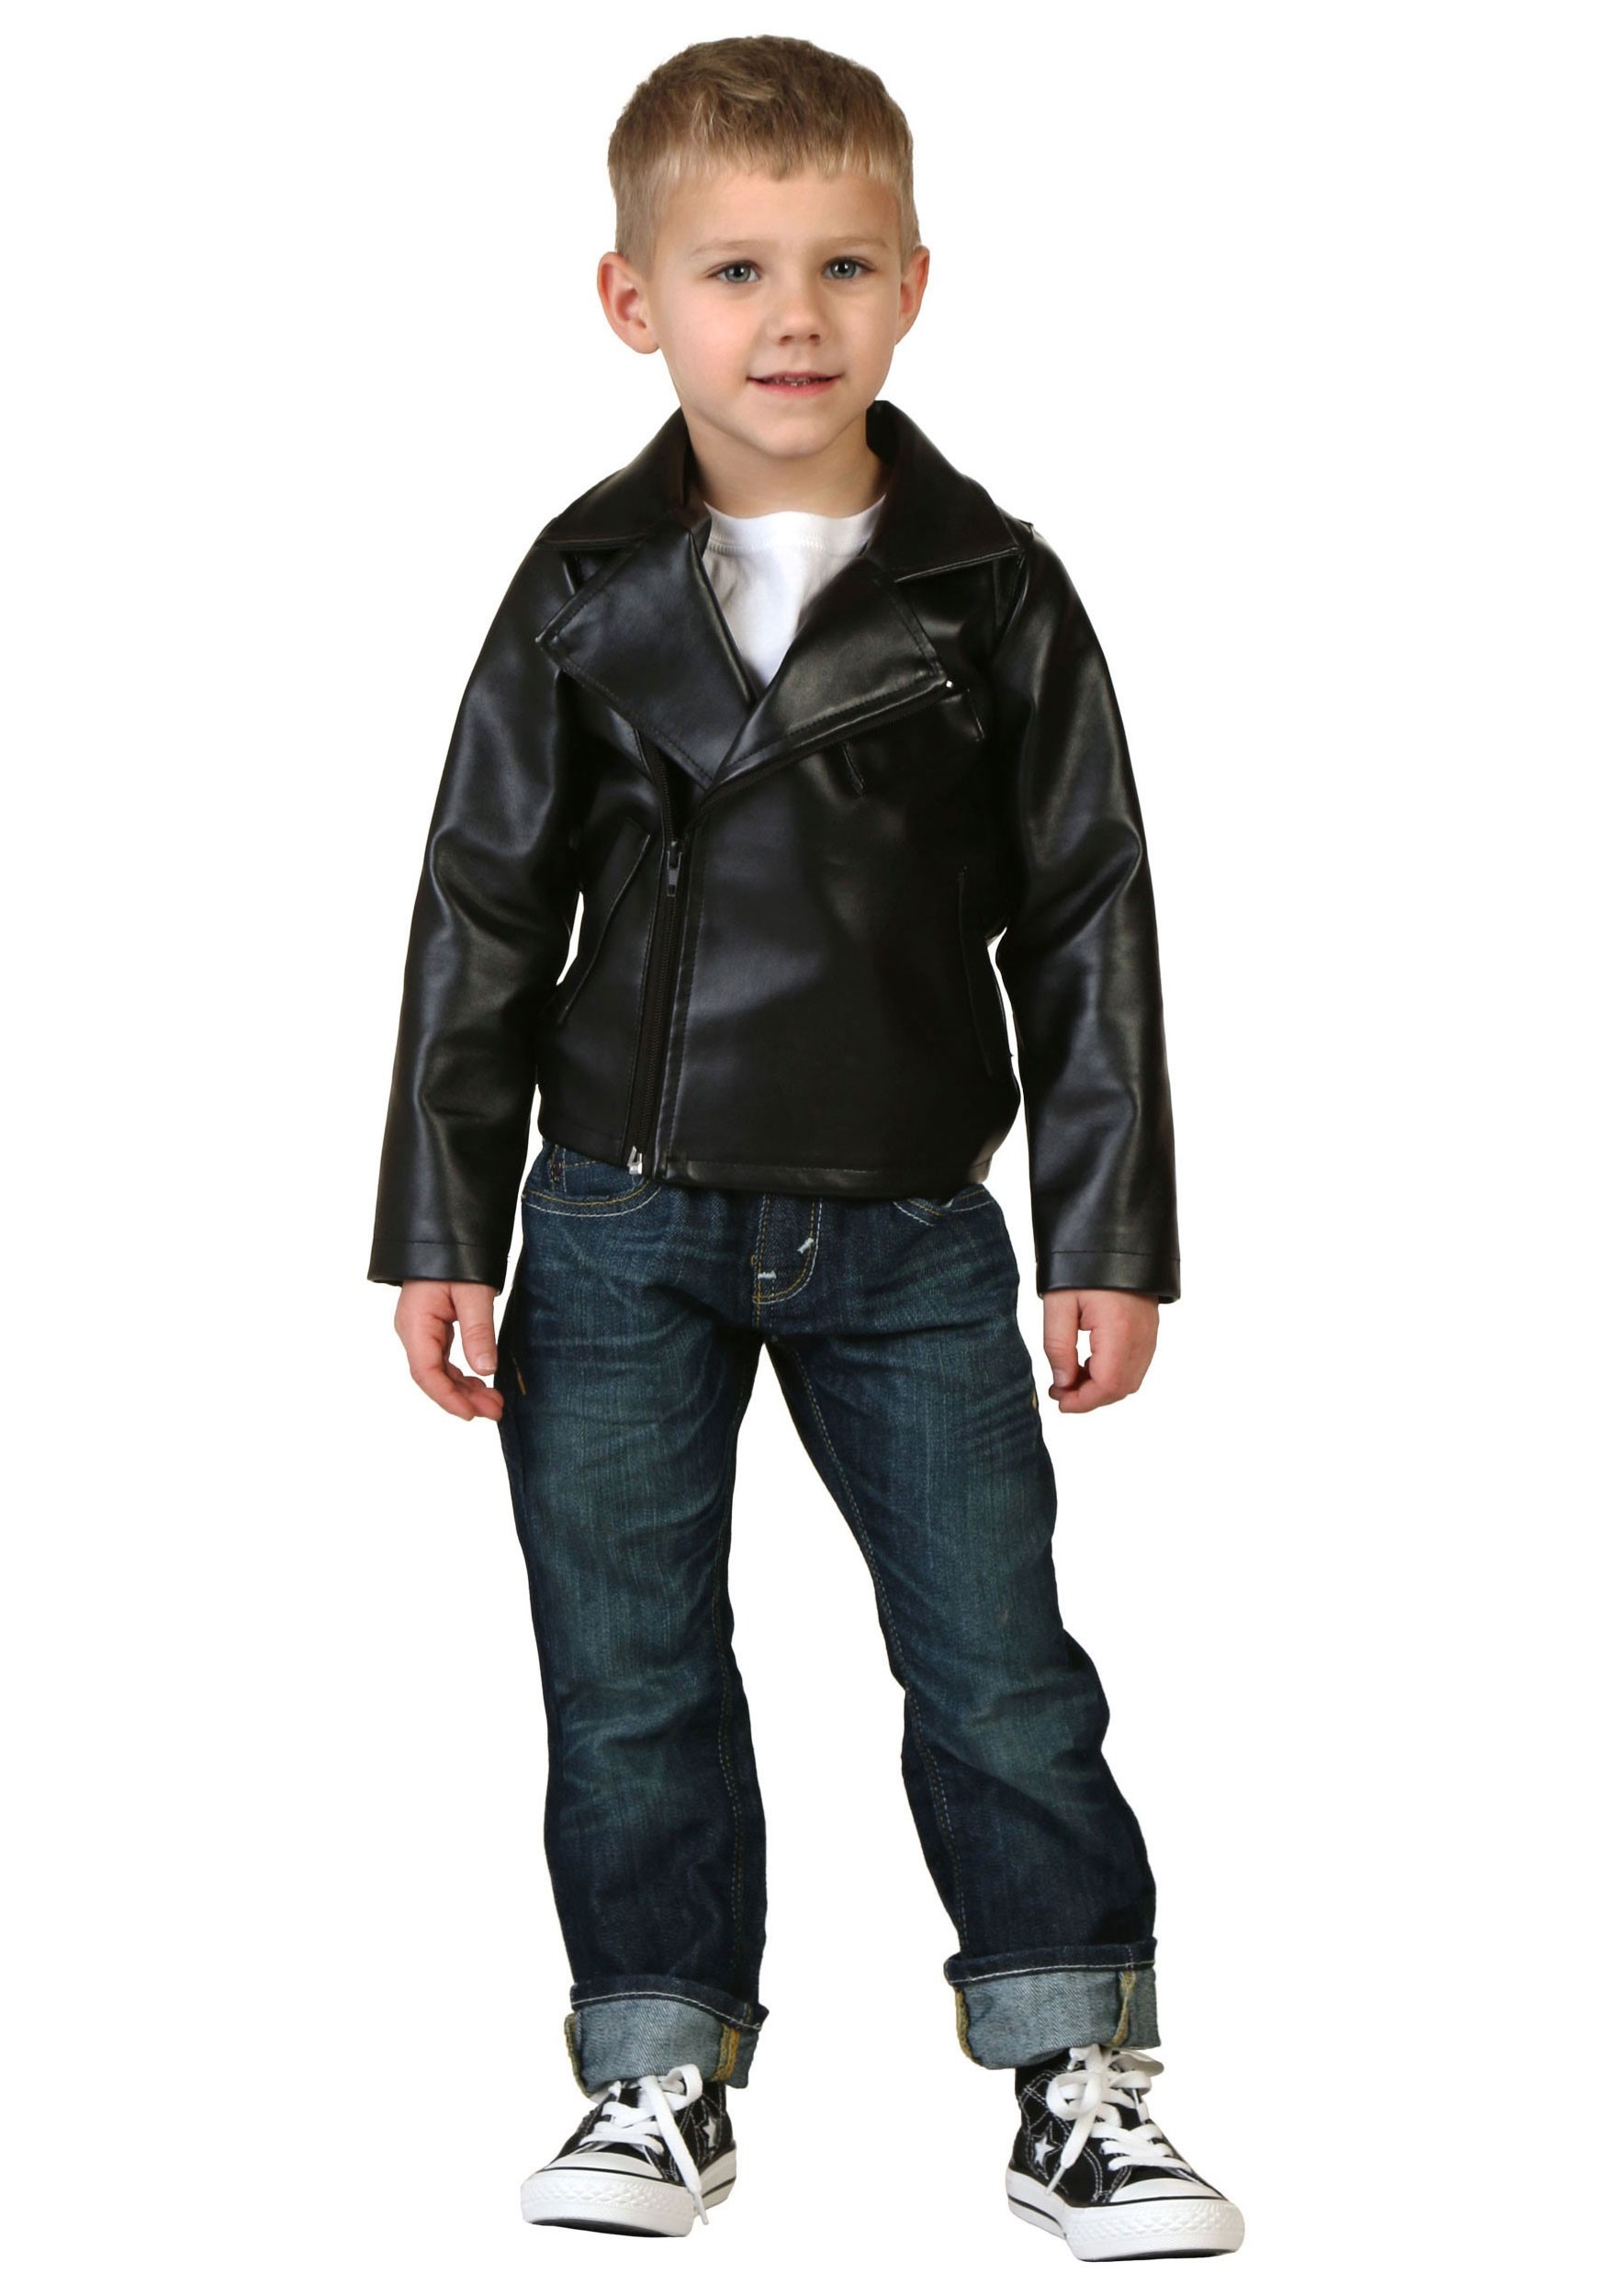 Toddler Grease T-Birds Jacket Costume | Officially licensed costume